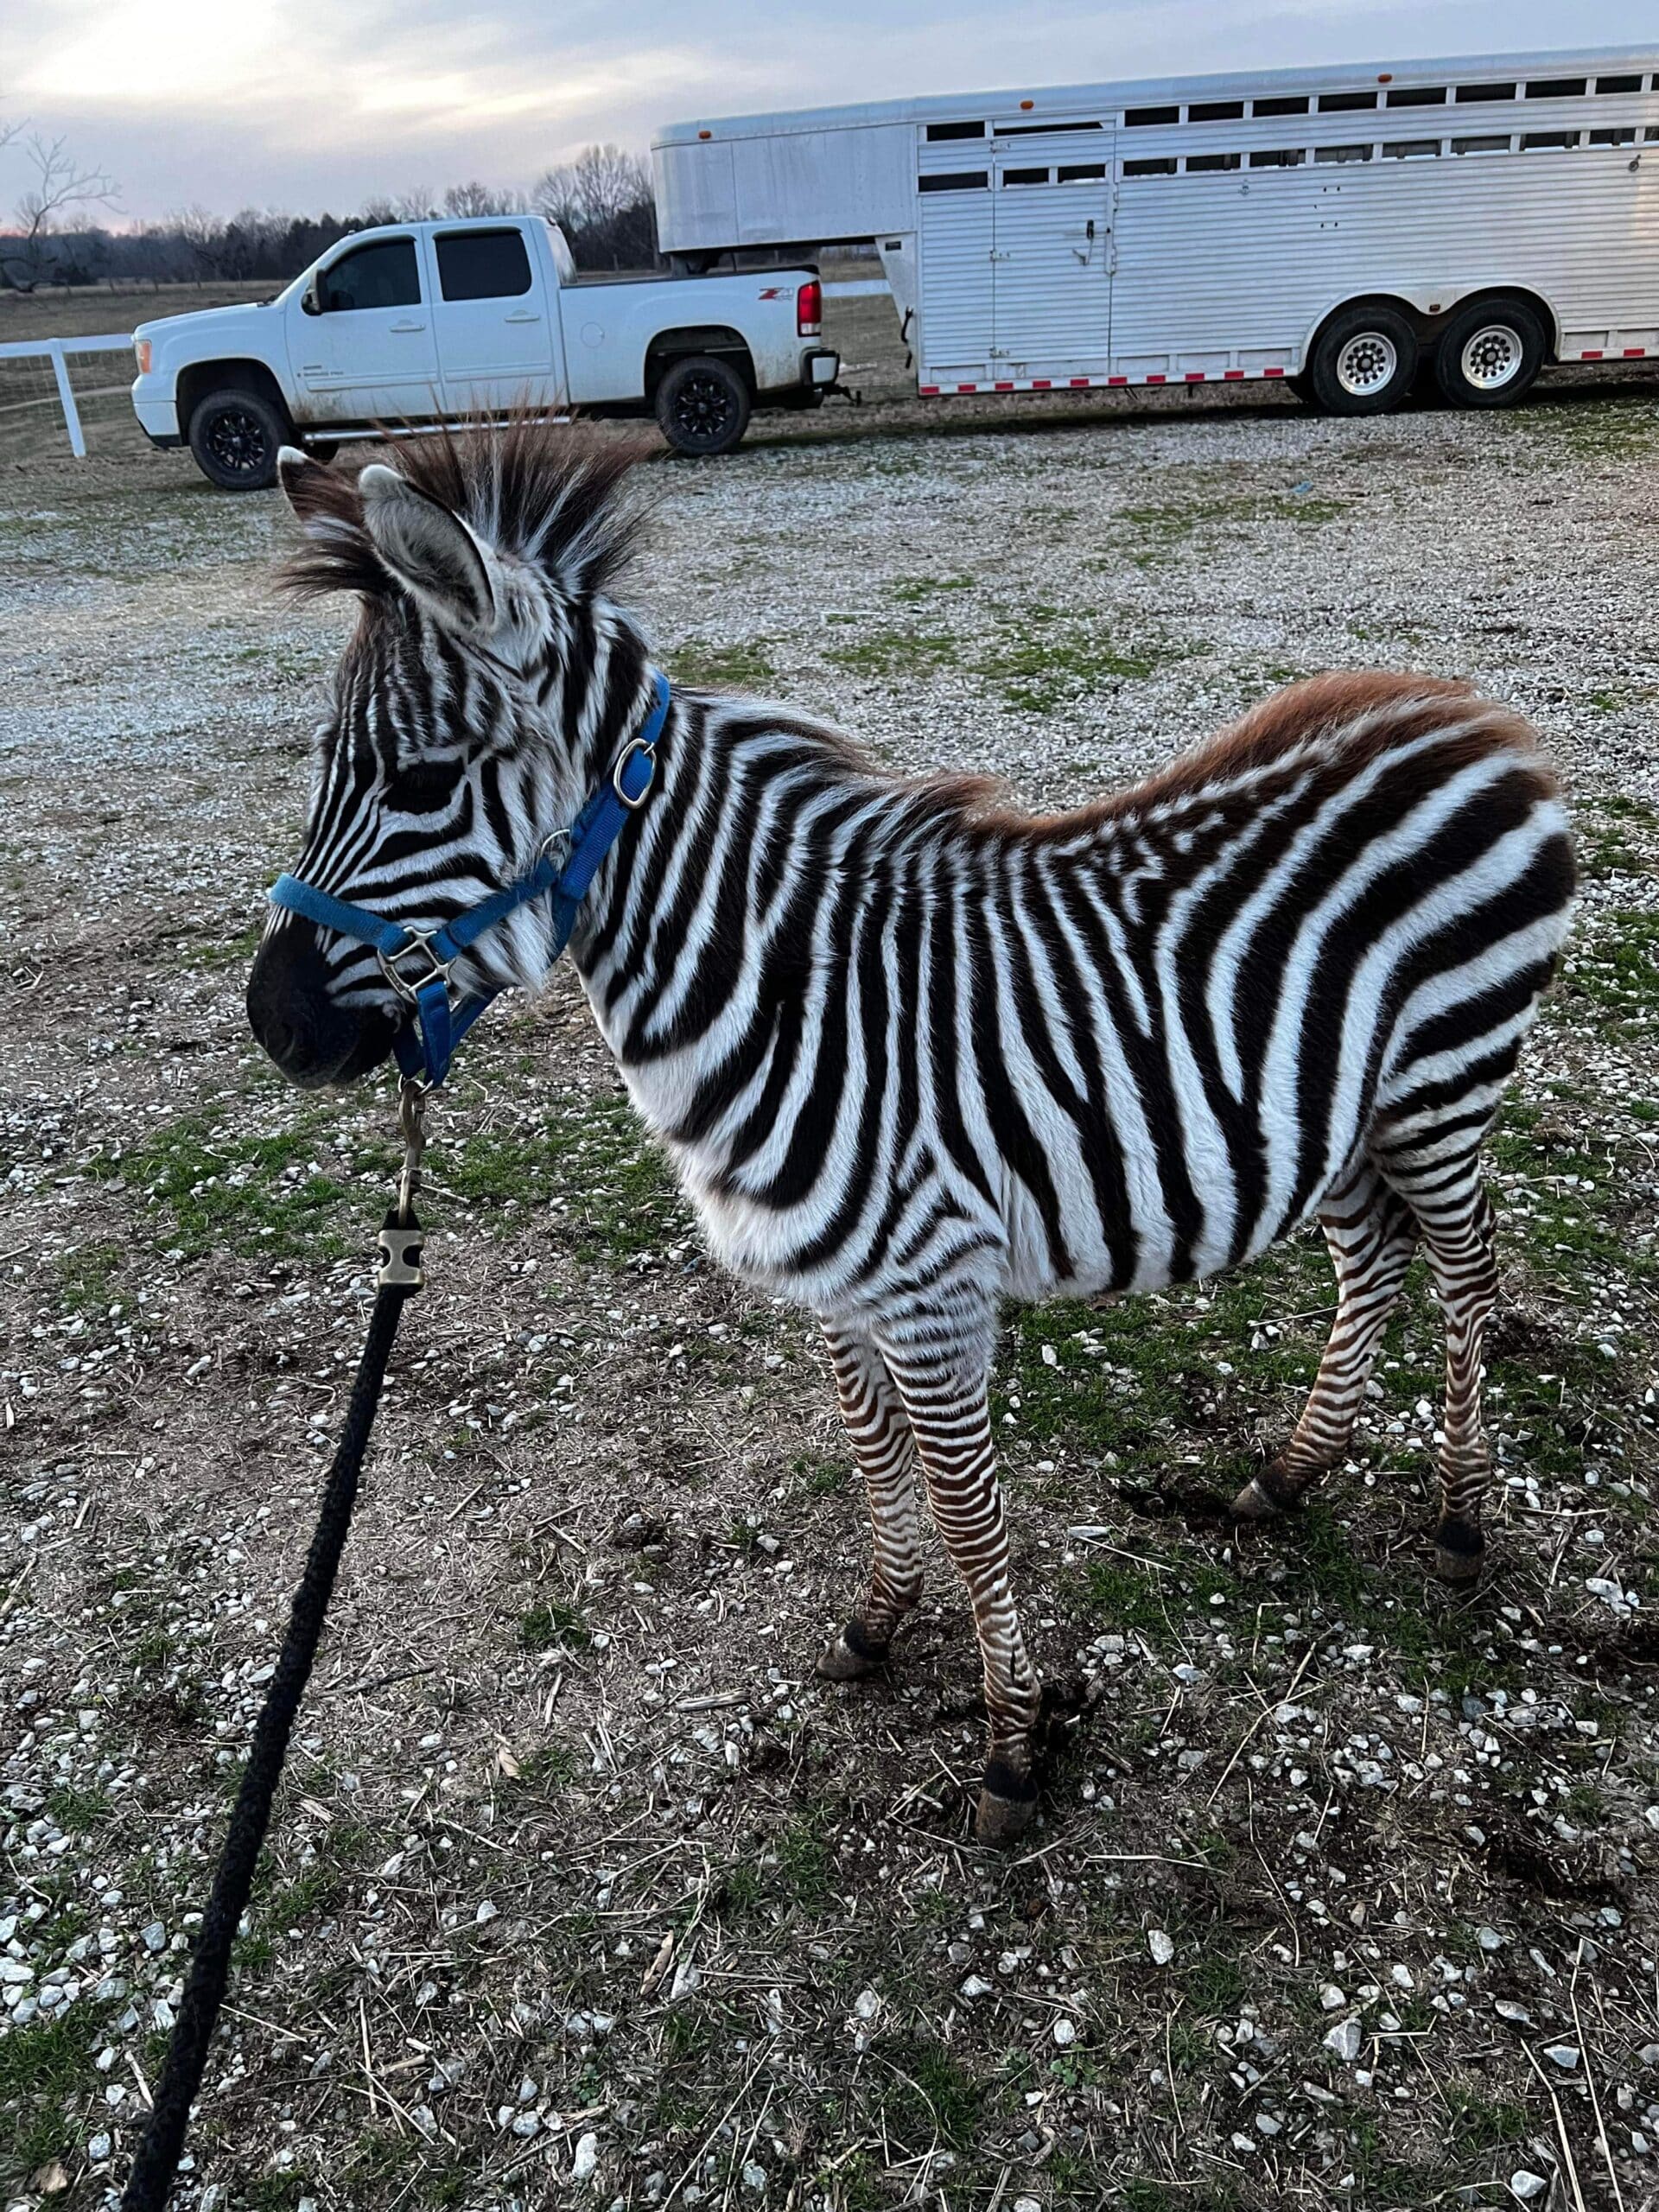 Zoey Zebra Filly 6 months old consigned ENDs 01/22 5pm EST - EWH